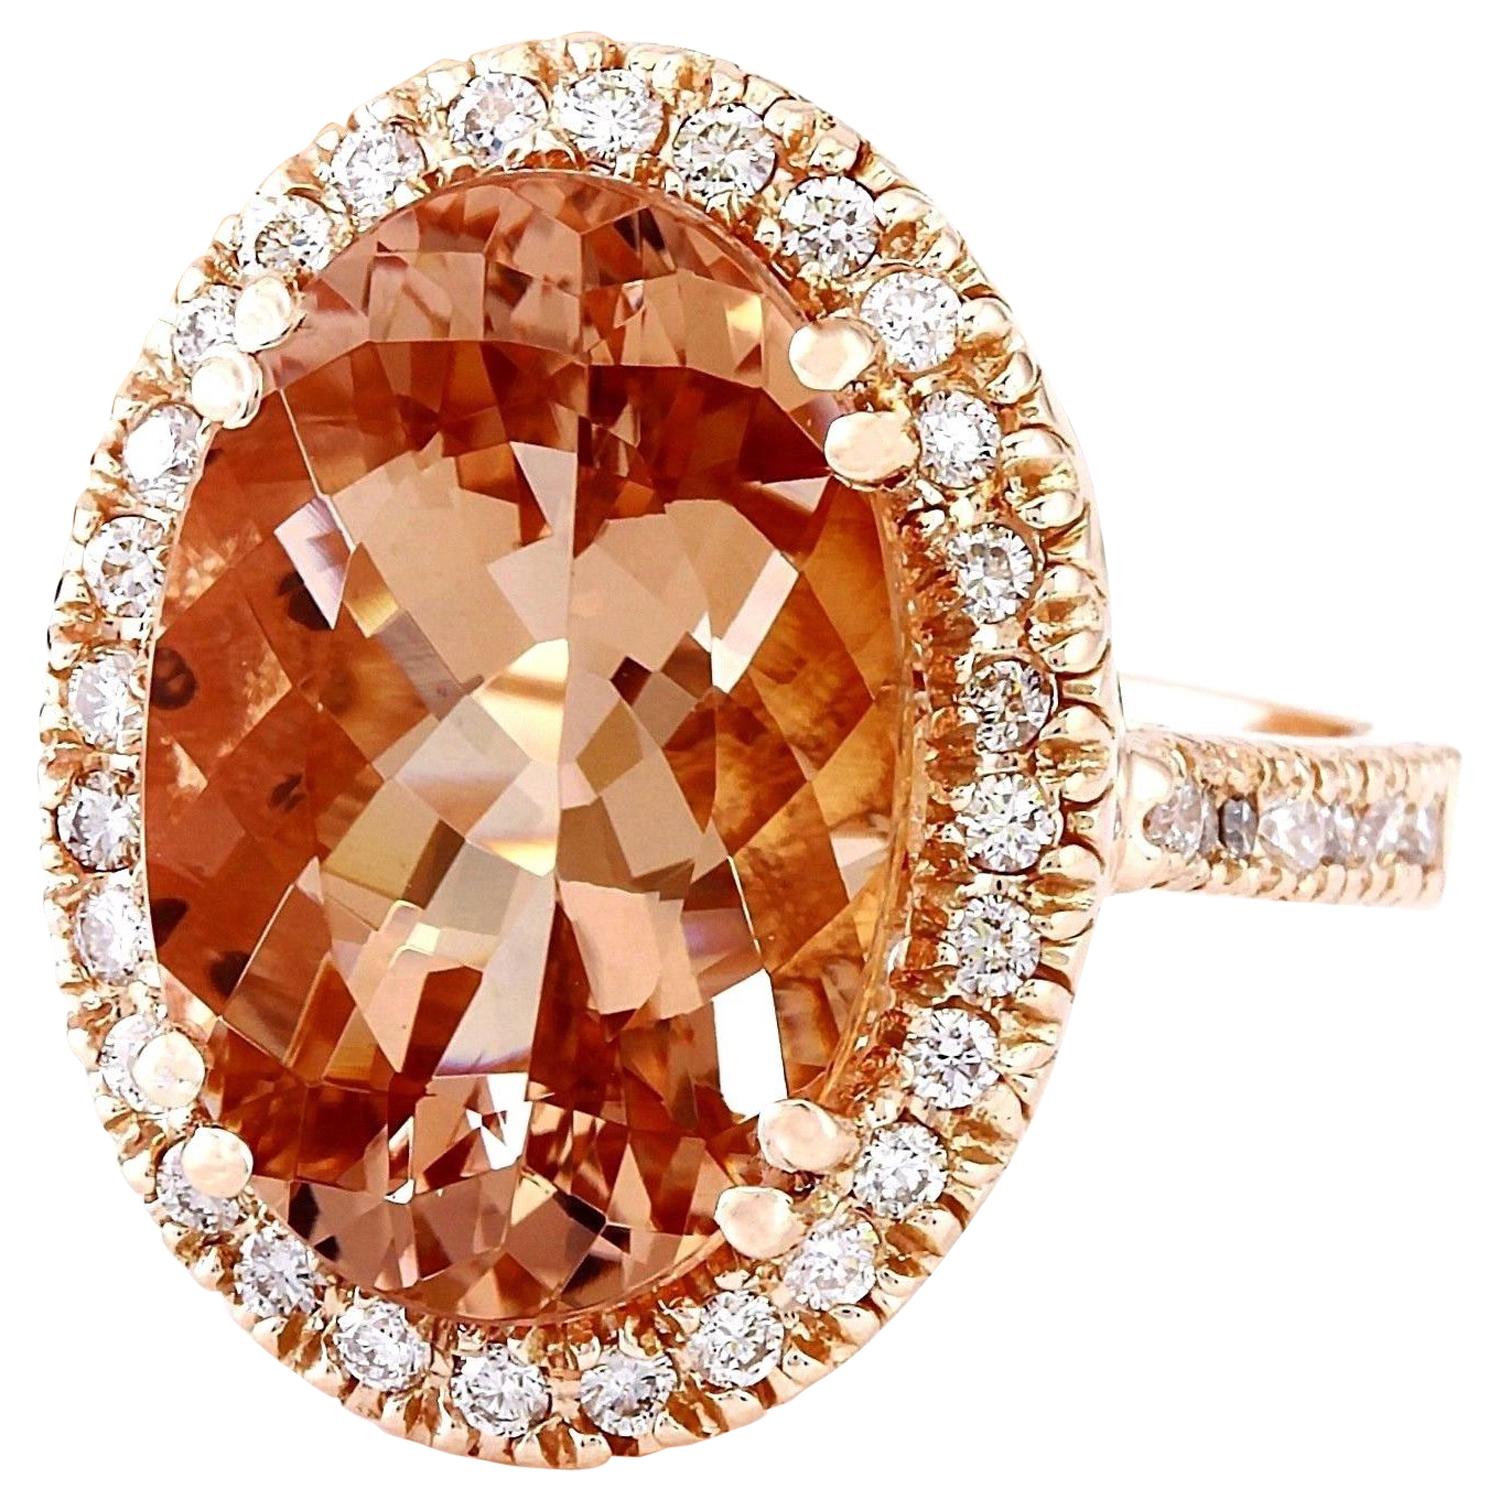 Indulge in luxury with our stunning 9.81 Carat Natural Morganite Ring, crafted in exquisite 14K Rose Gold. The focal point of this enchanting piece is a captivating oval-shaped Morganite, weighing 9.11 Carats and measuring 16.00x12.00 mm.